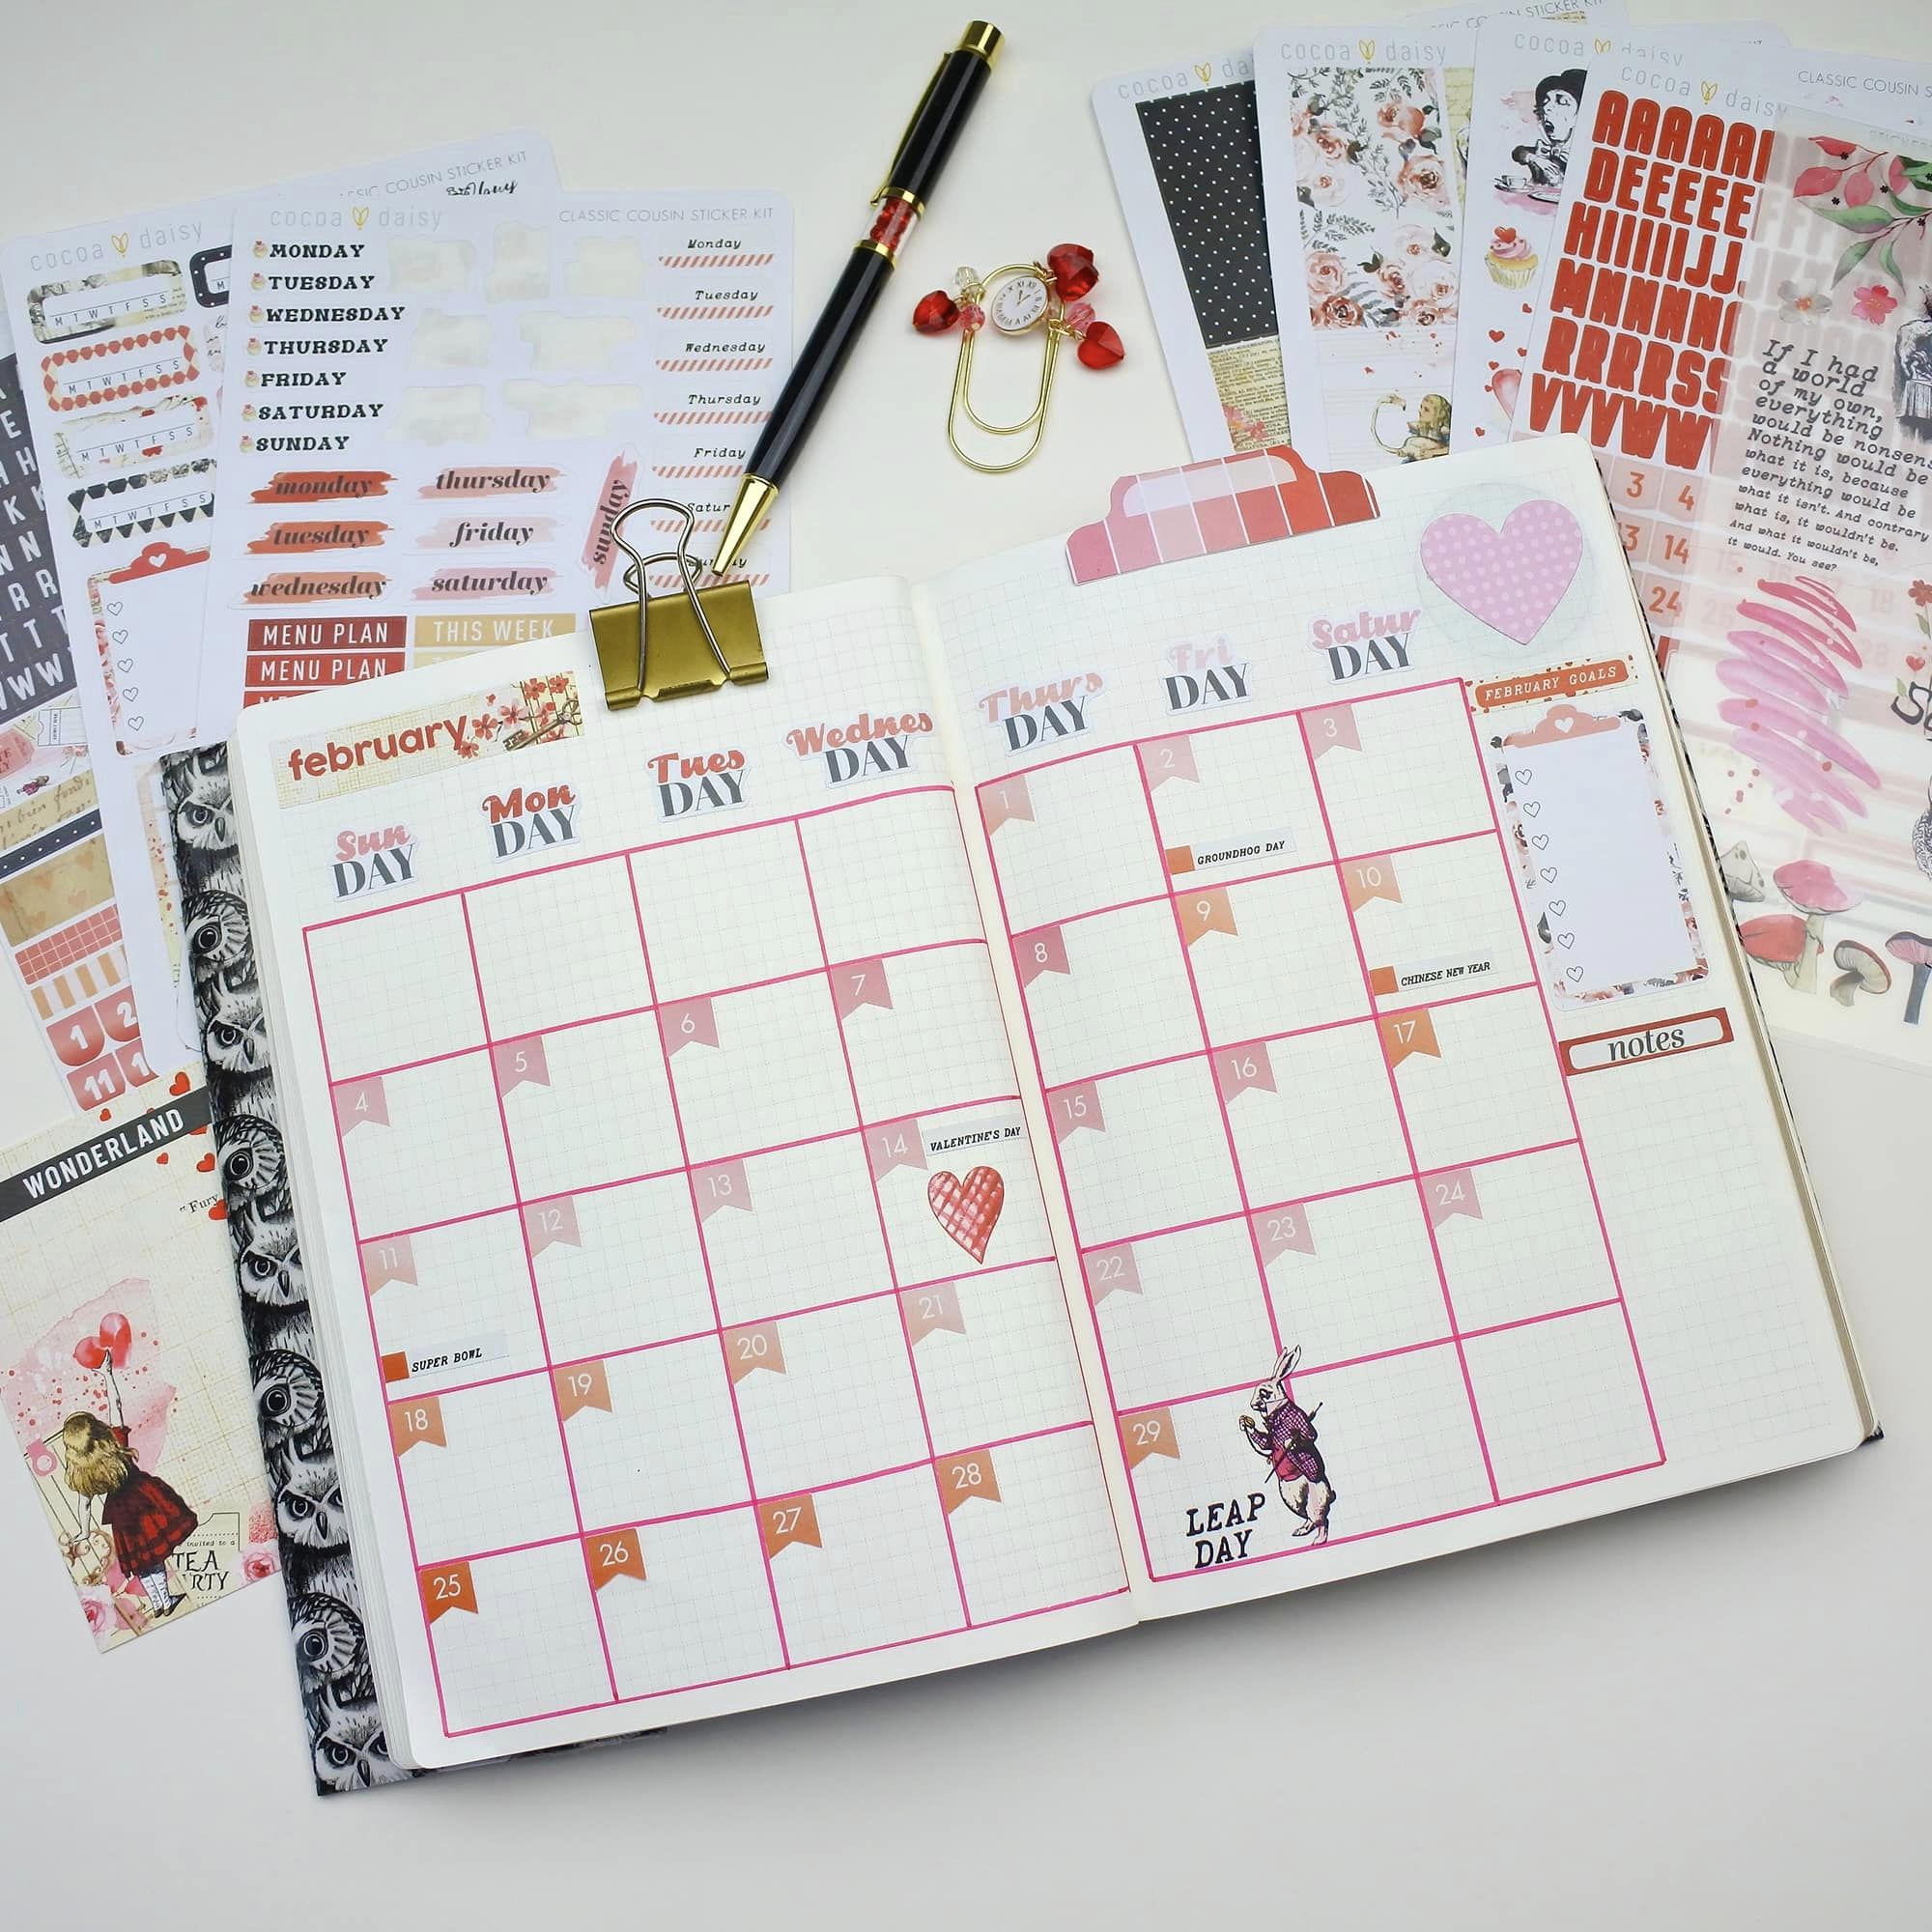 Customize Your Planning with Cocoa Daisy